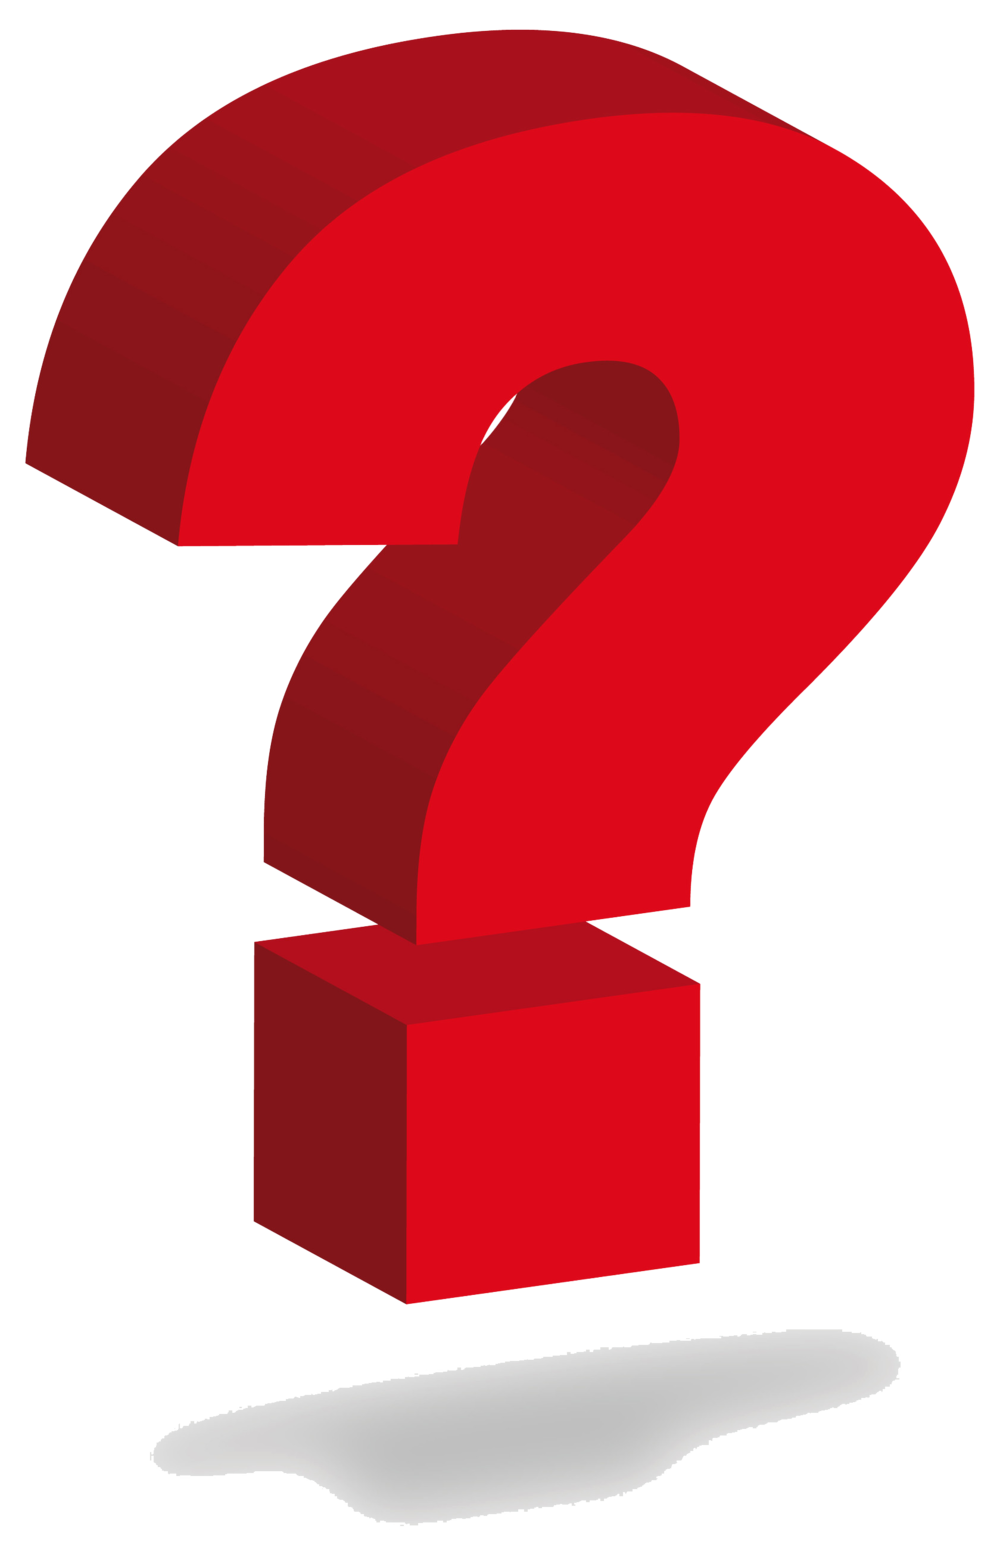 Red question mark clipart cli - Clipart Questions